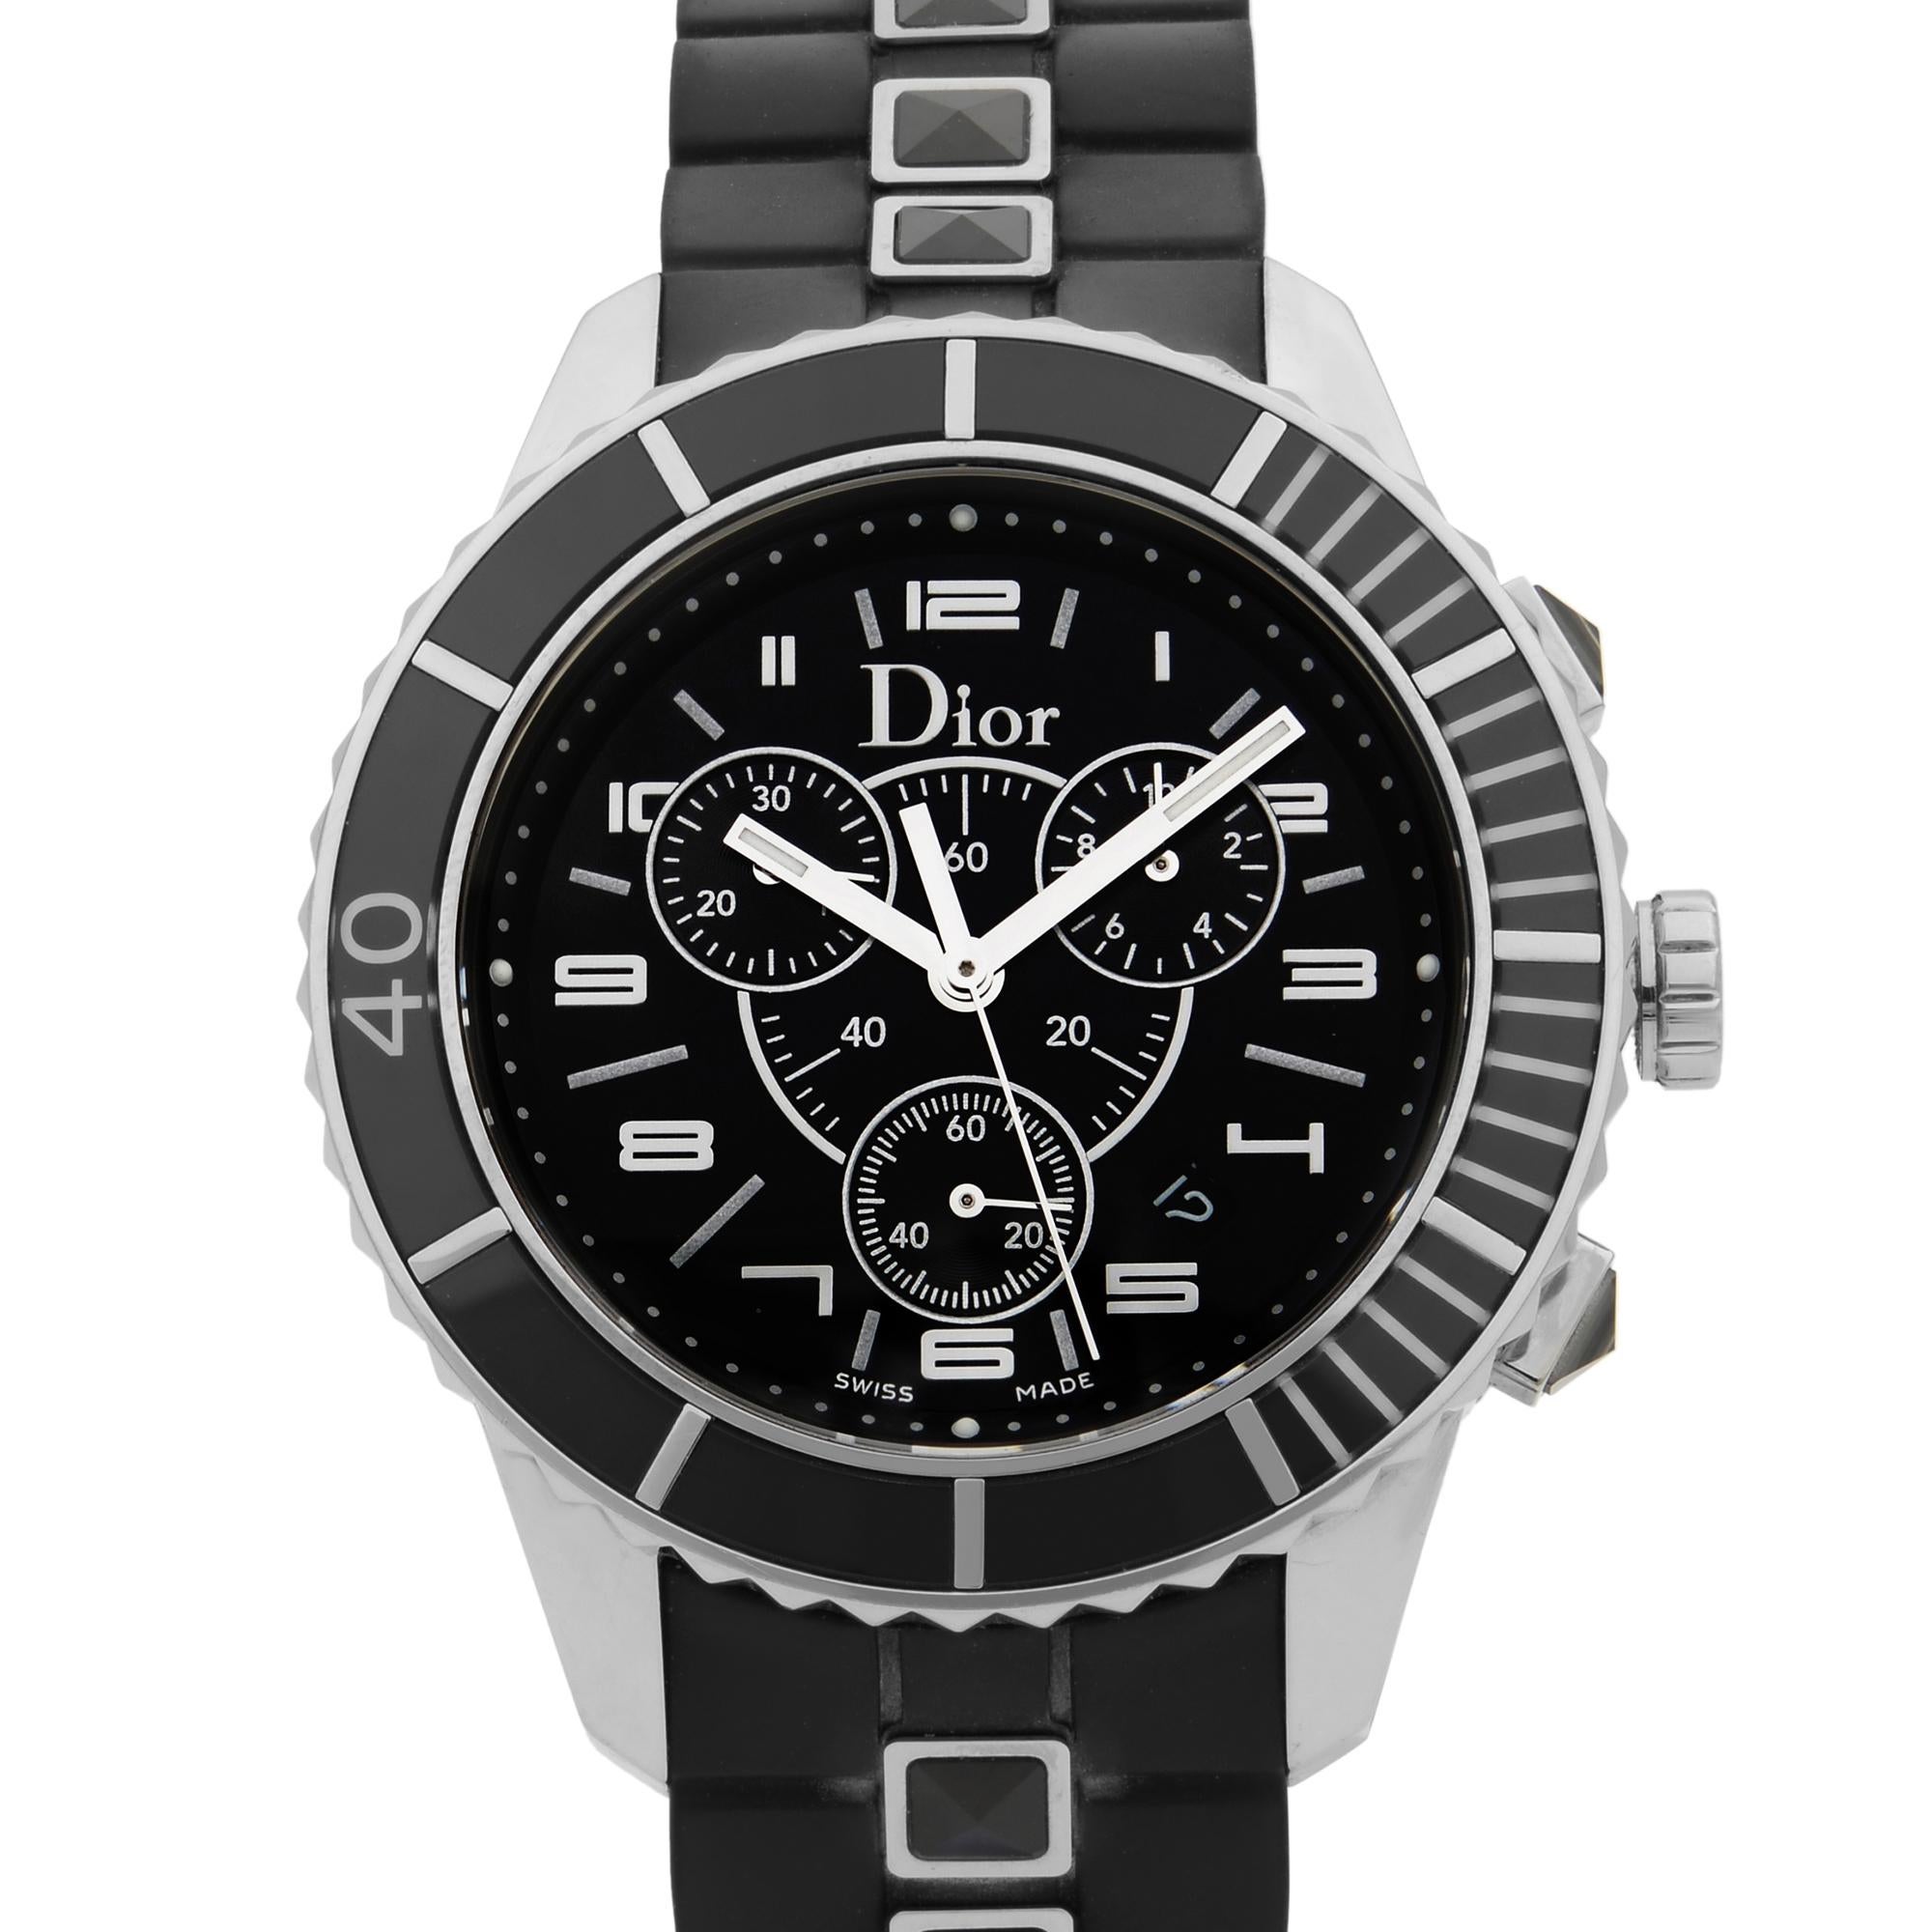 This pre-owned Christian Dior Christal  CD114317R001 is a beautiful Unisex timepiece that is powered by quartz (battery) movement which is cased in a stainless steel case. It has a round shape face, chronograph, chronograph hand, date indicator,